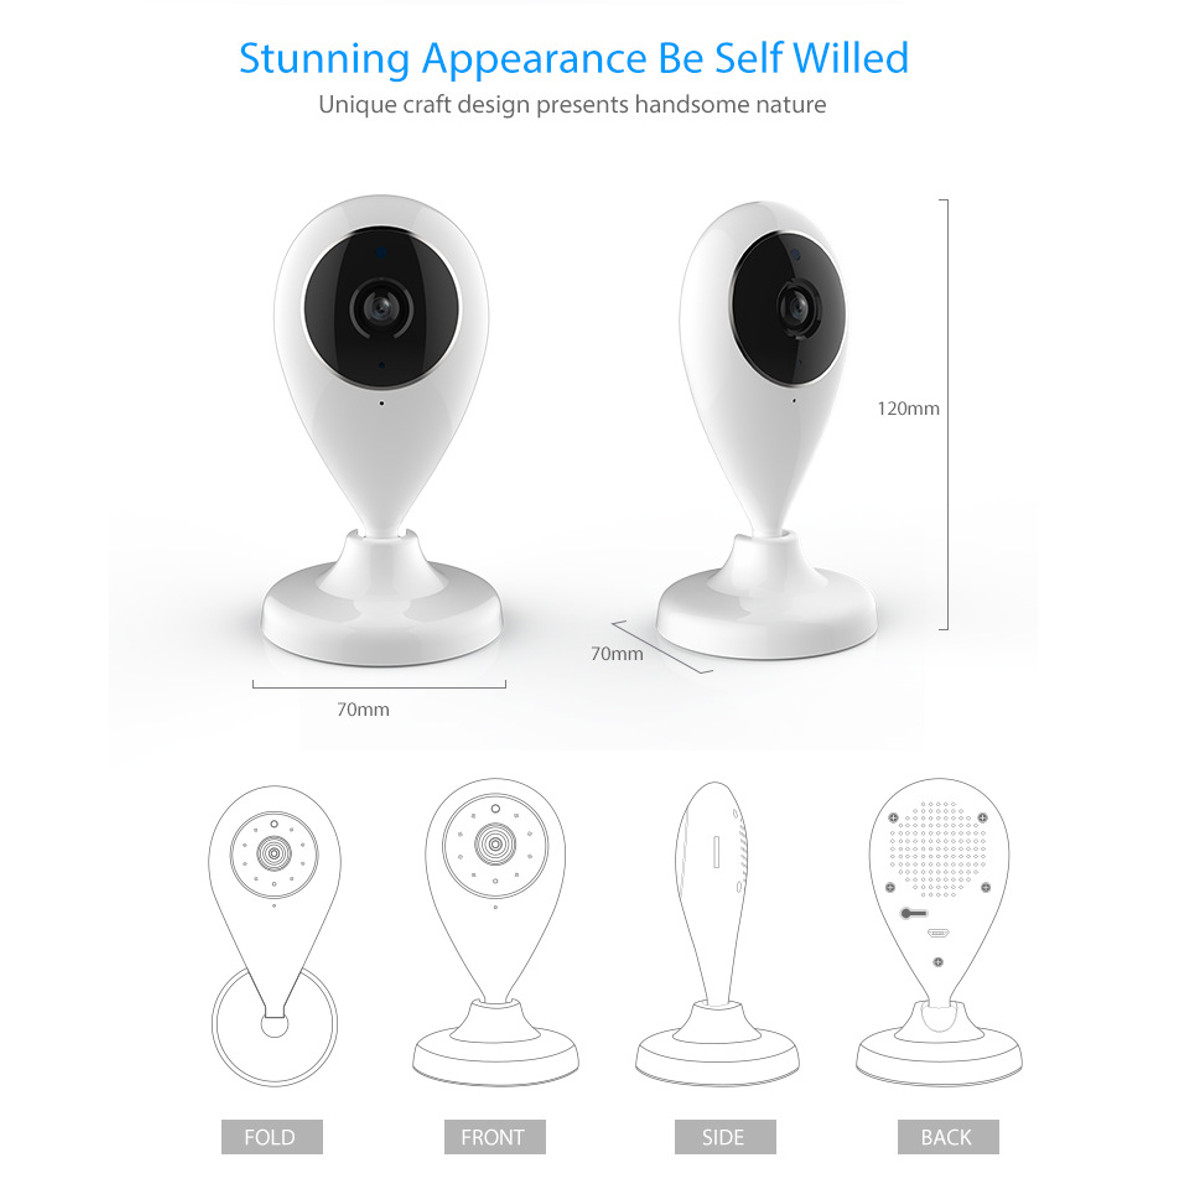 WIFI-Security-IP-Camera-HD-720P-Wireless-Smart-Night-Vision-Home-Baby-Monitor-1402749